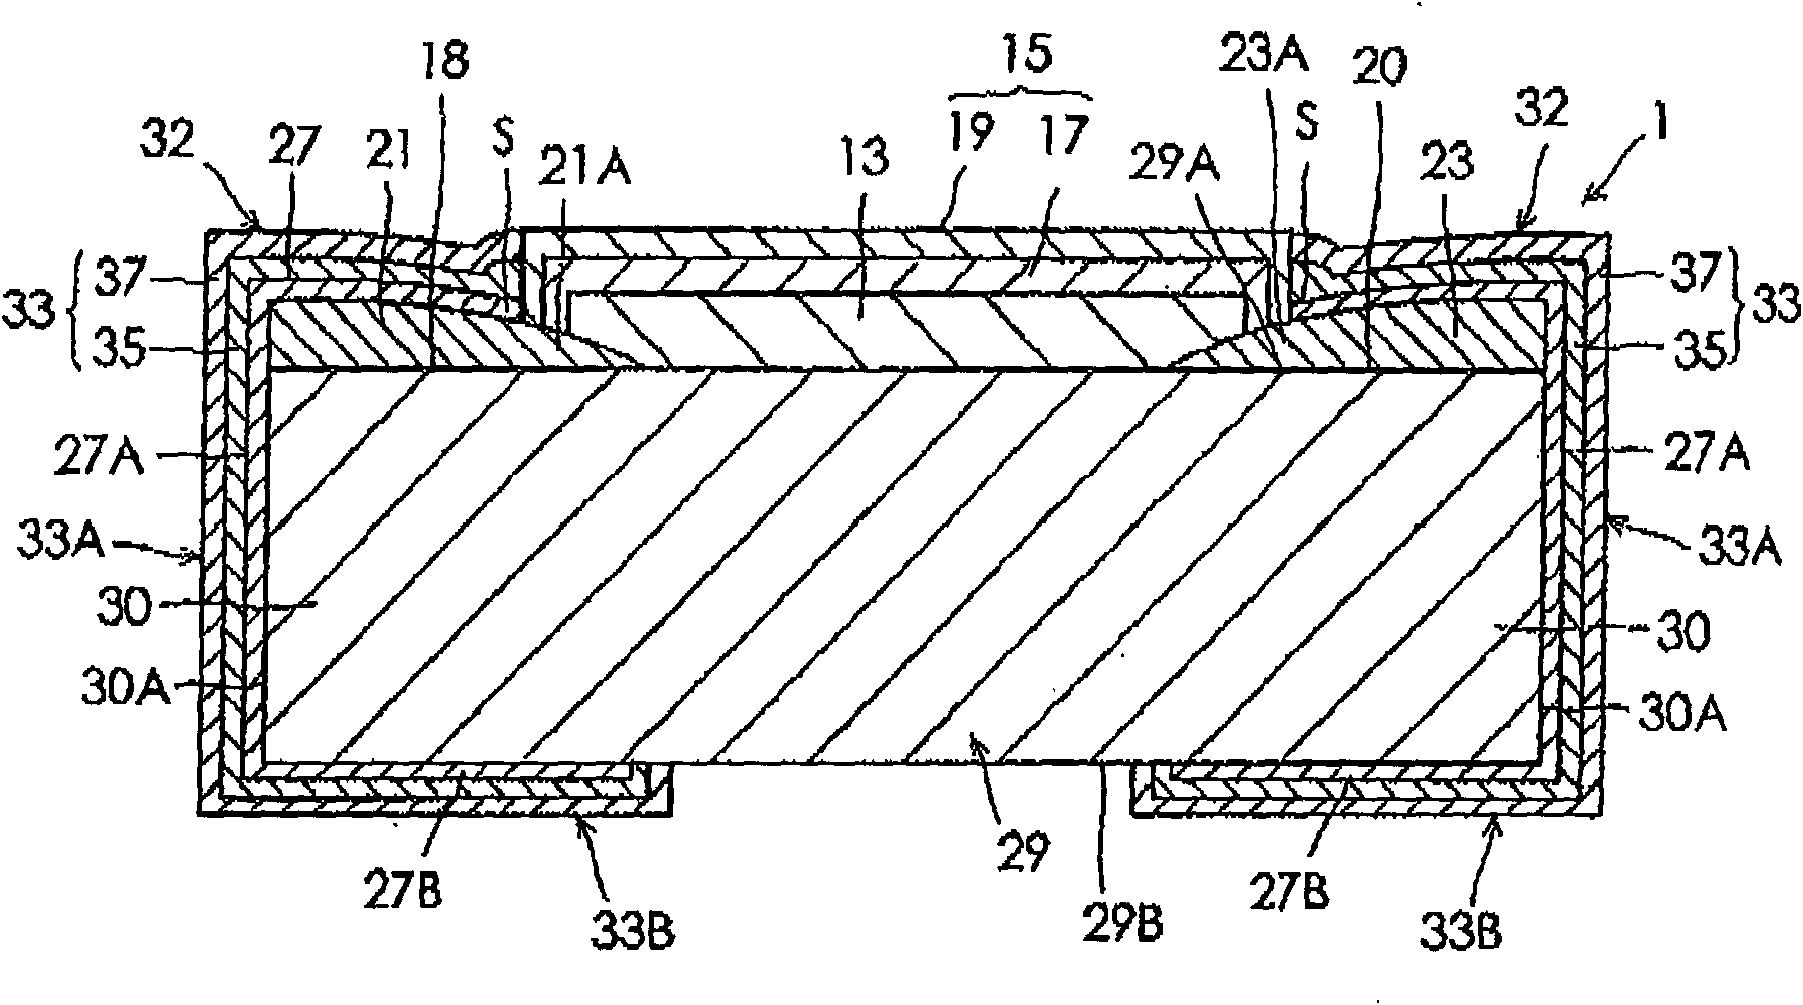 Chip-like electric component and method for manufacturing same